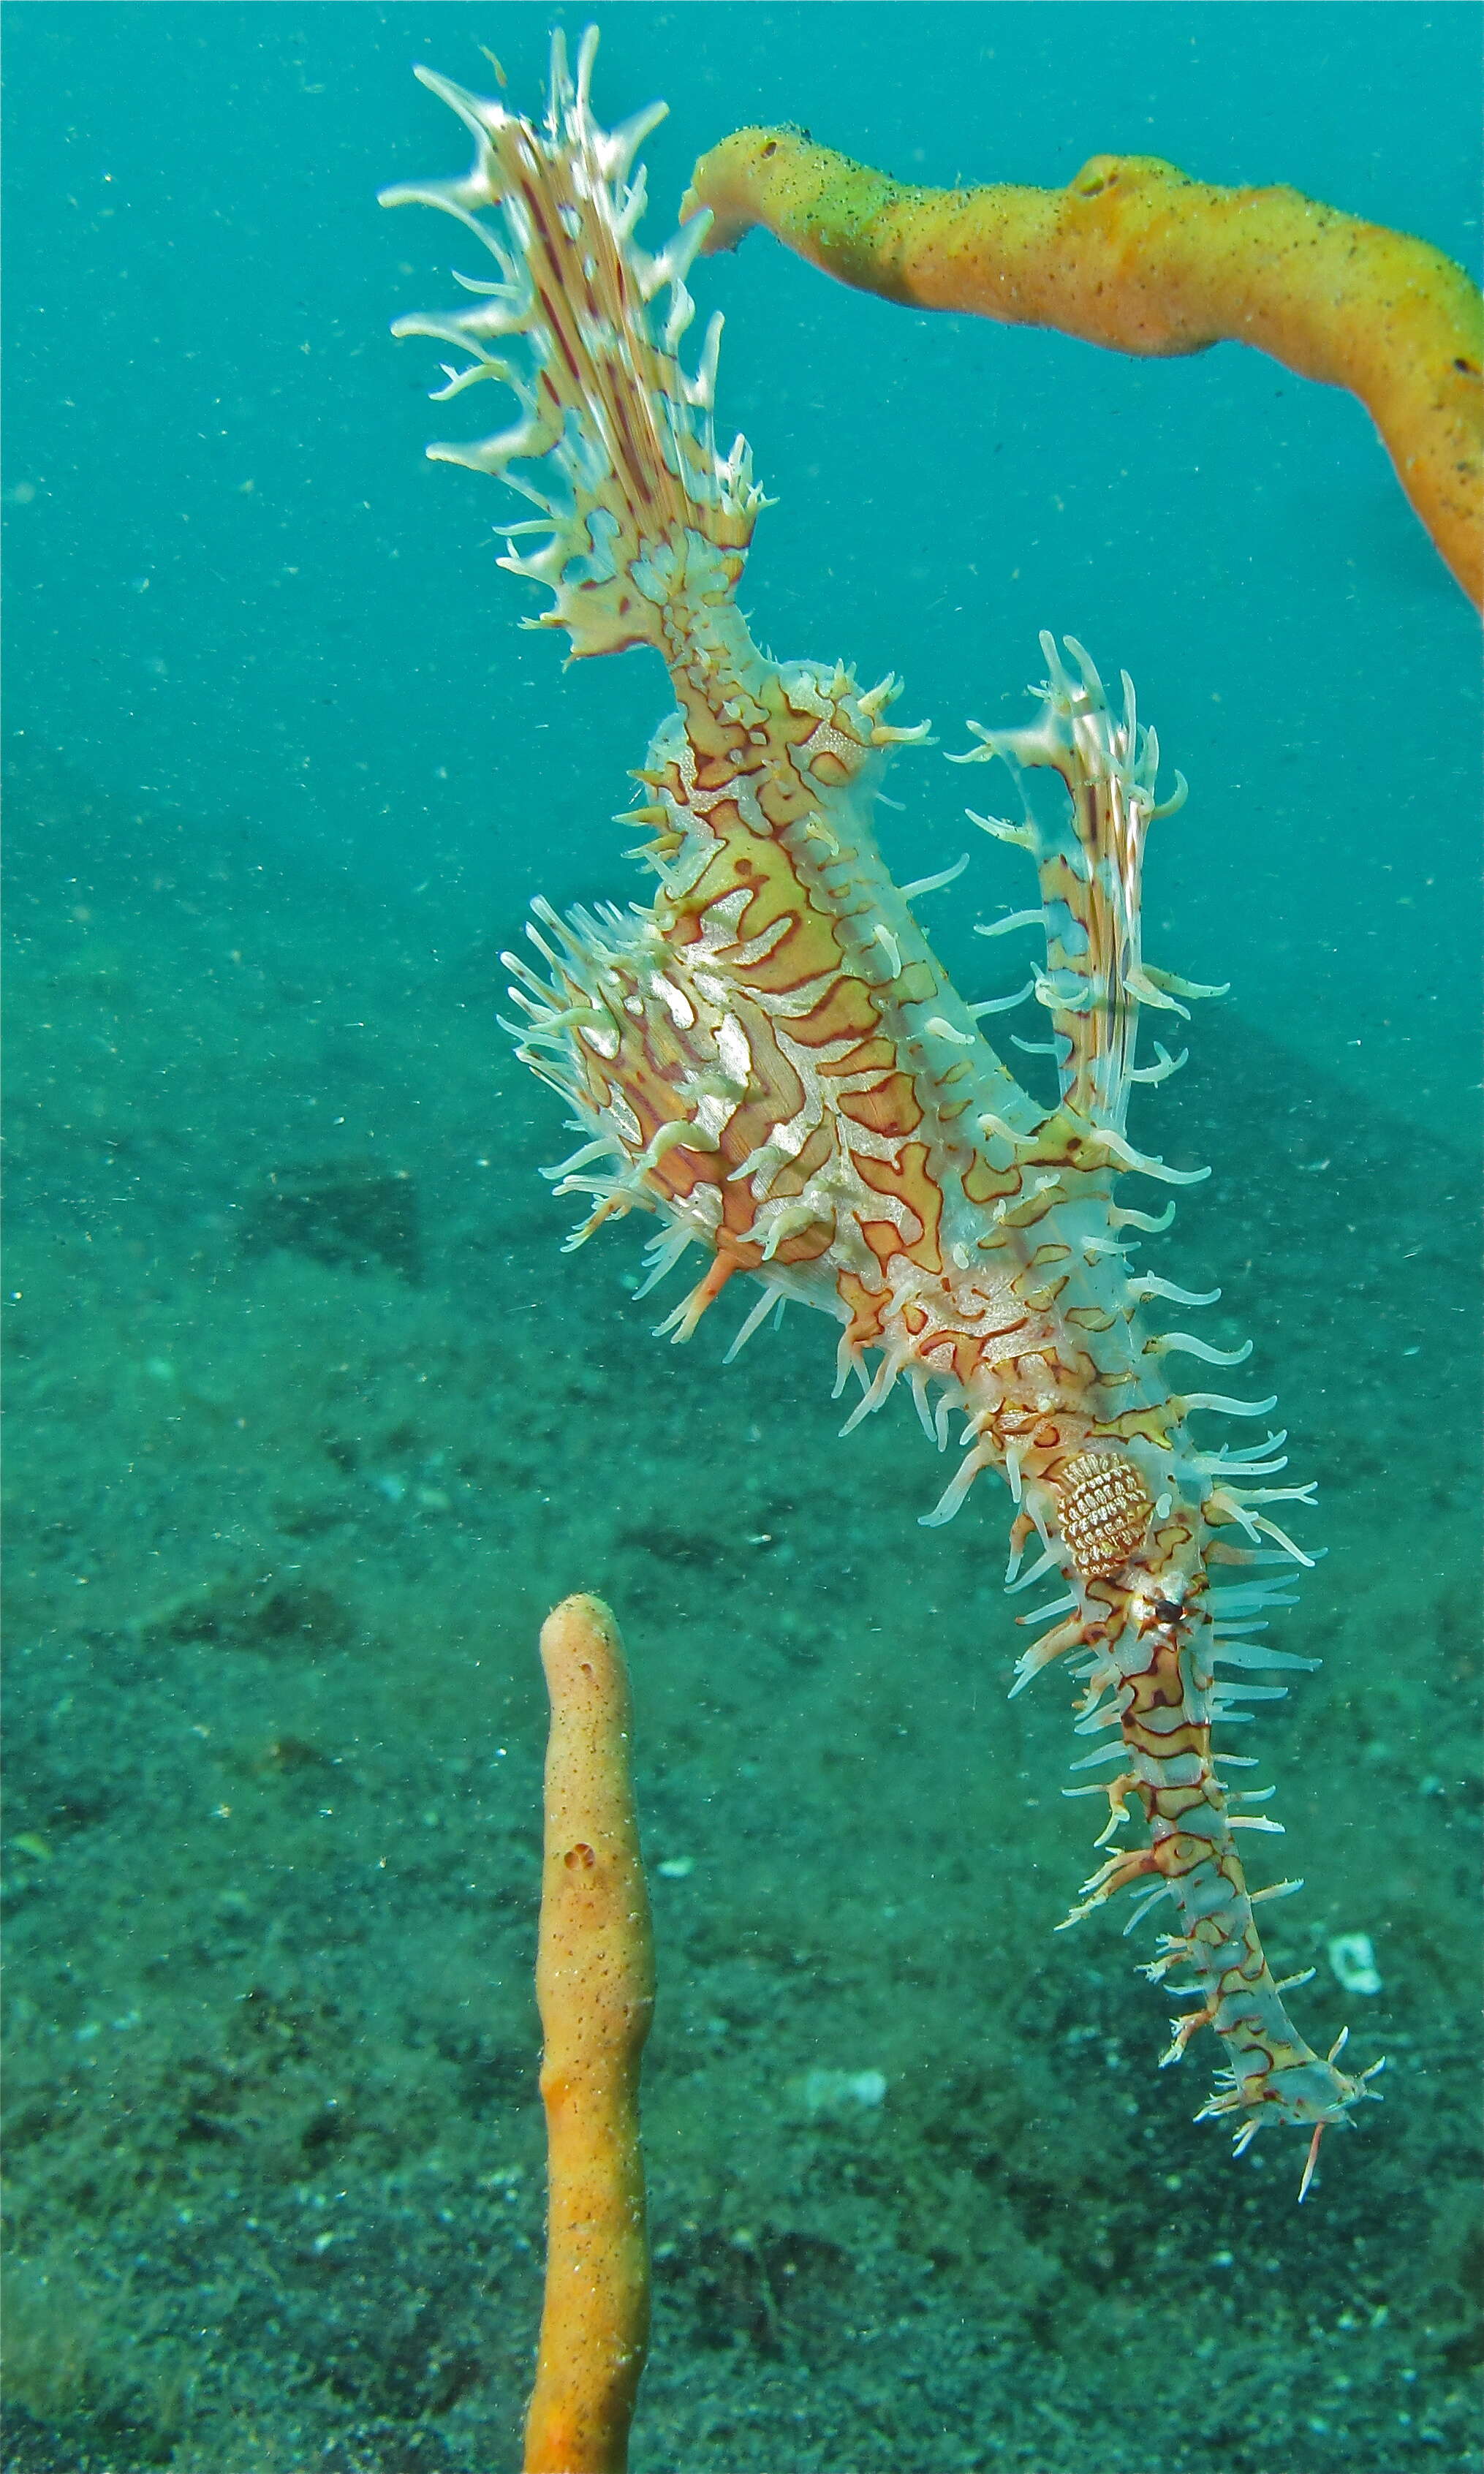 Image of ghost pipefishes